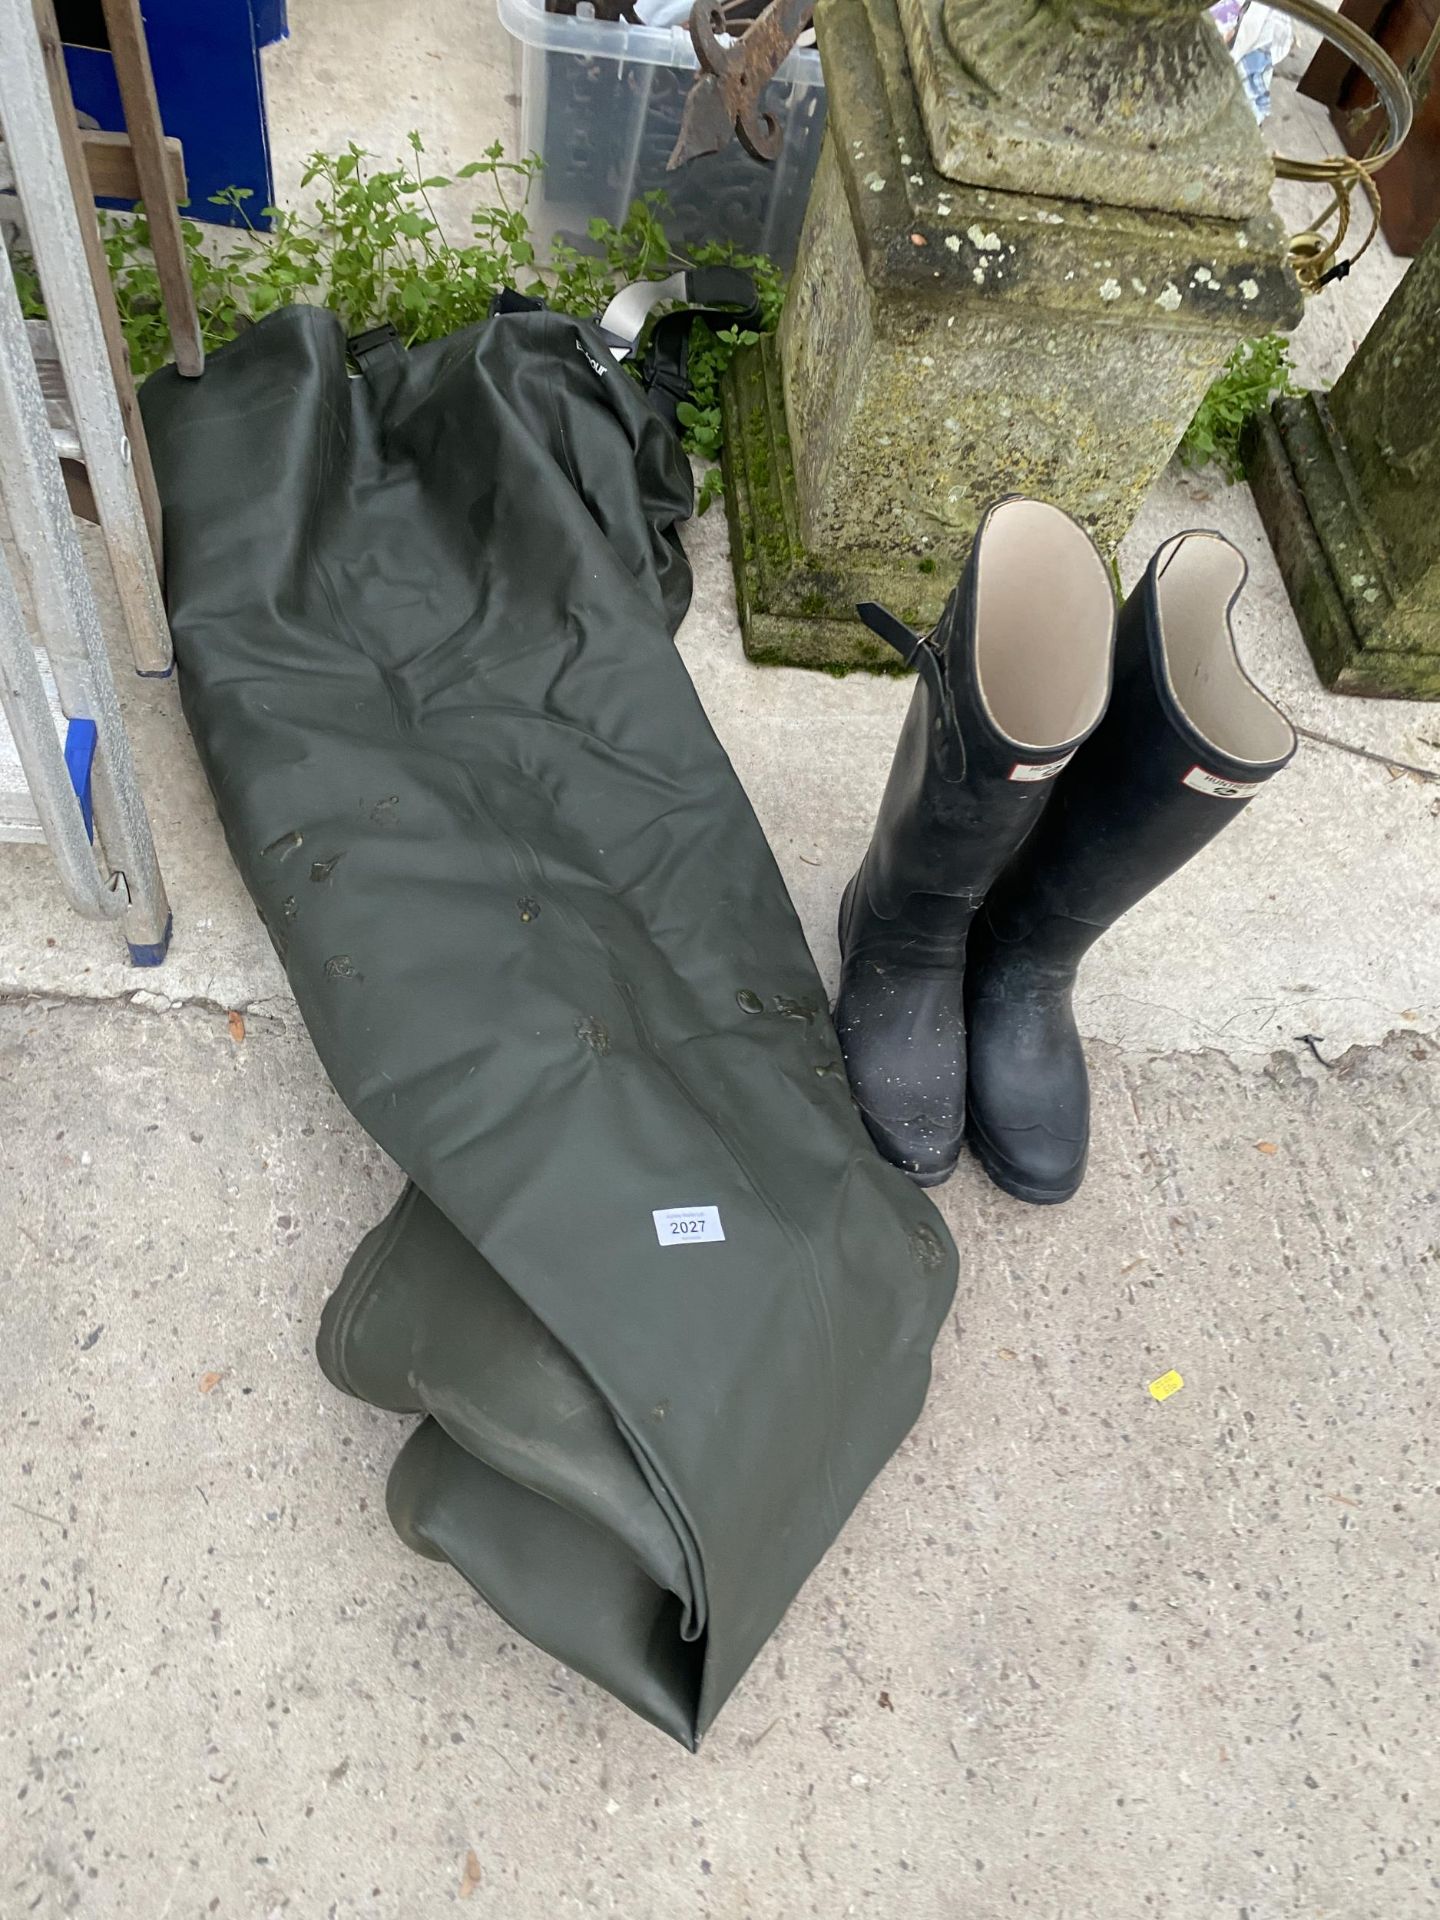 A PAIR OF BARBOUR WADERS AND A PAIR OF HUNTER WELLIES